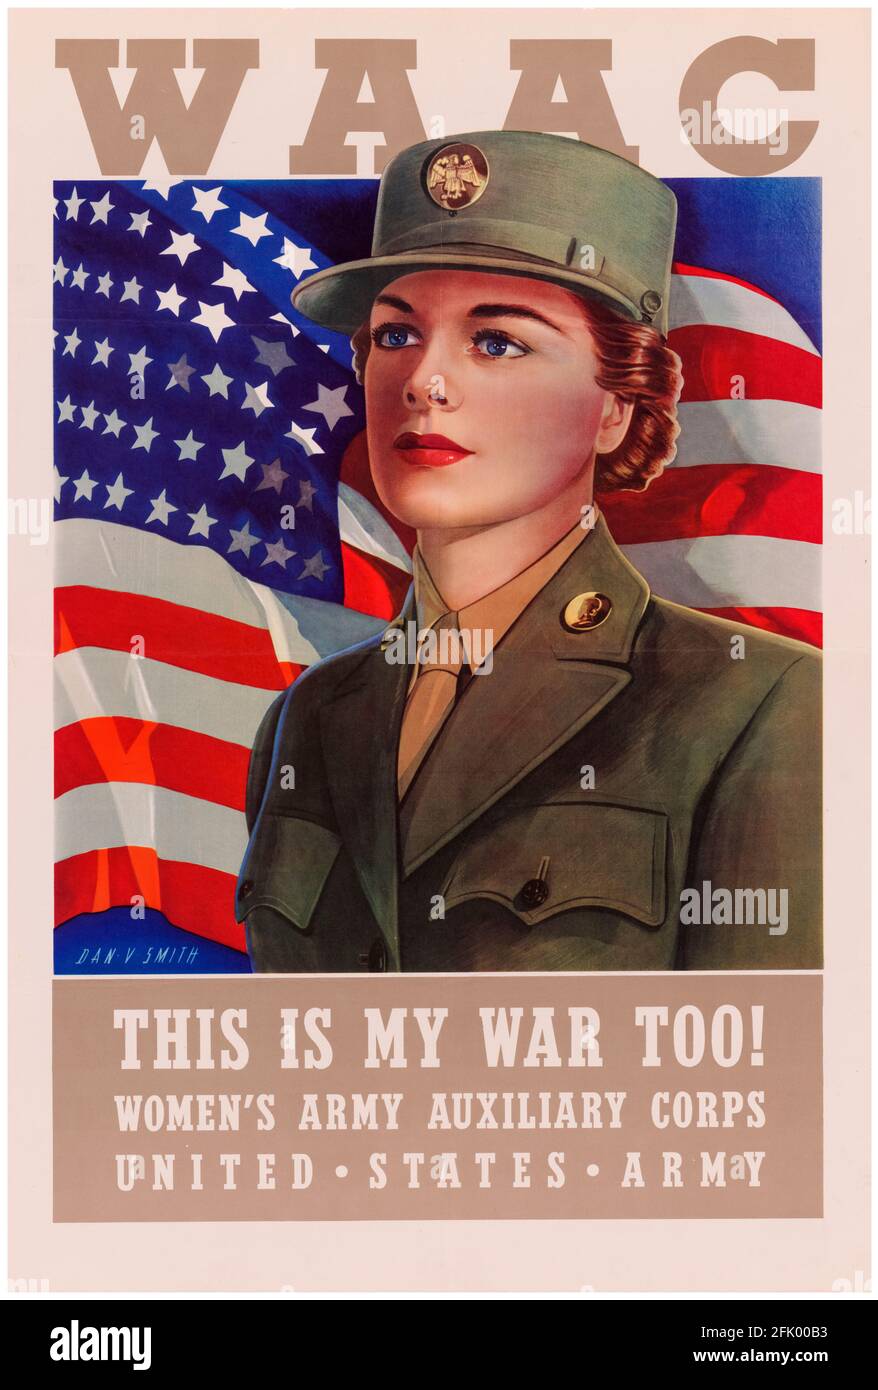 American, poster war work femminile della seconda guerra mondiale, WAAC, Women's Army Auxiliary Corps, This is My War Too!, 1941-1945 Foto Stock